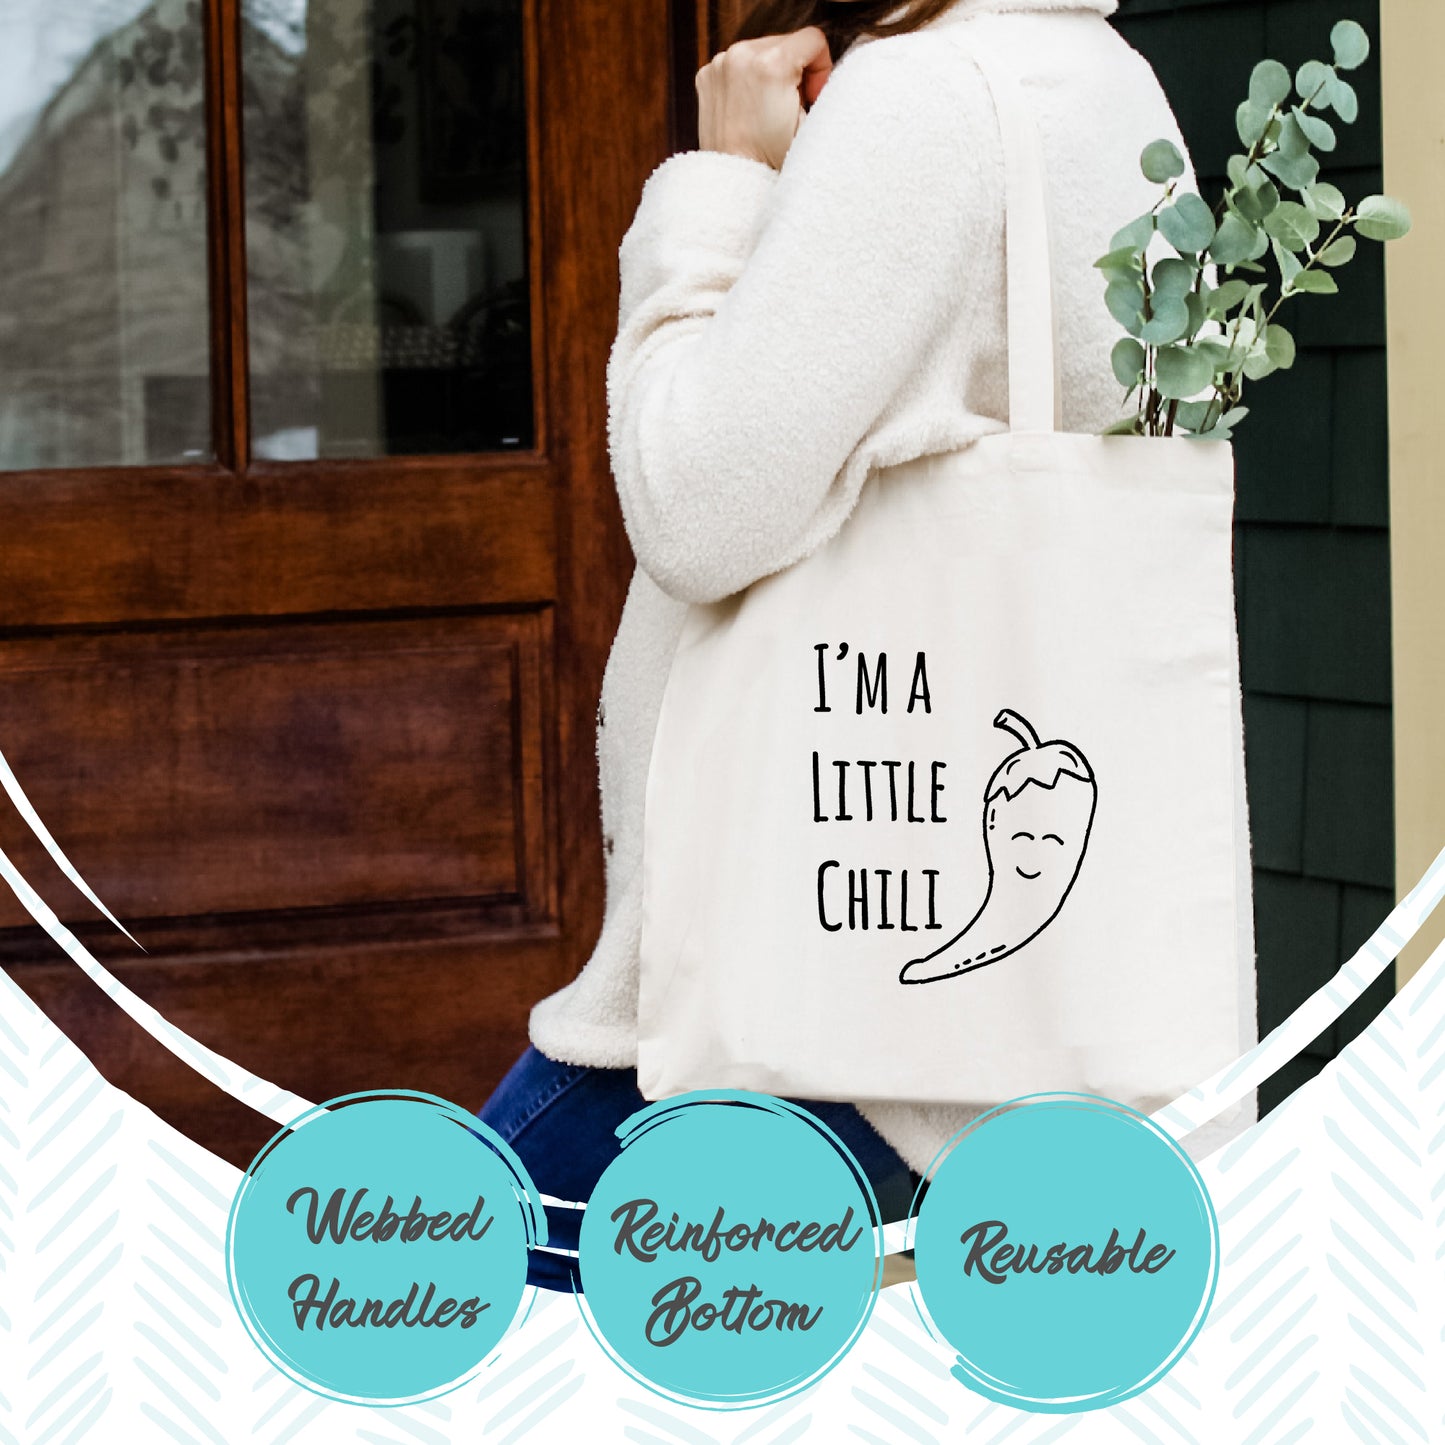 Highly Meditated - Tote Bag - MoonlightMakers